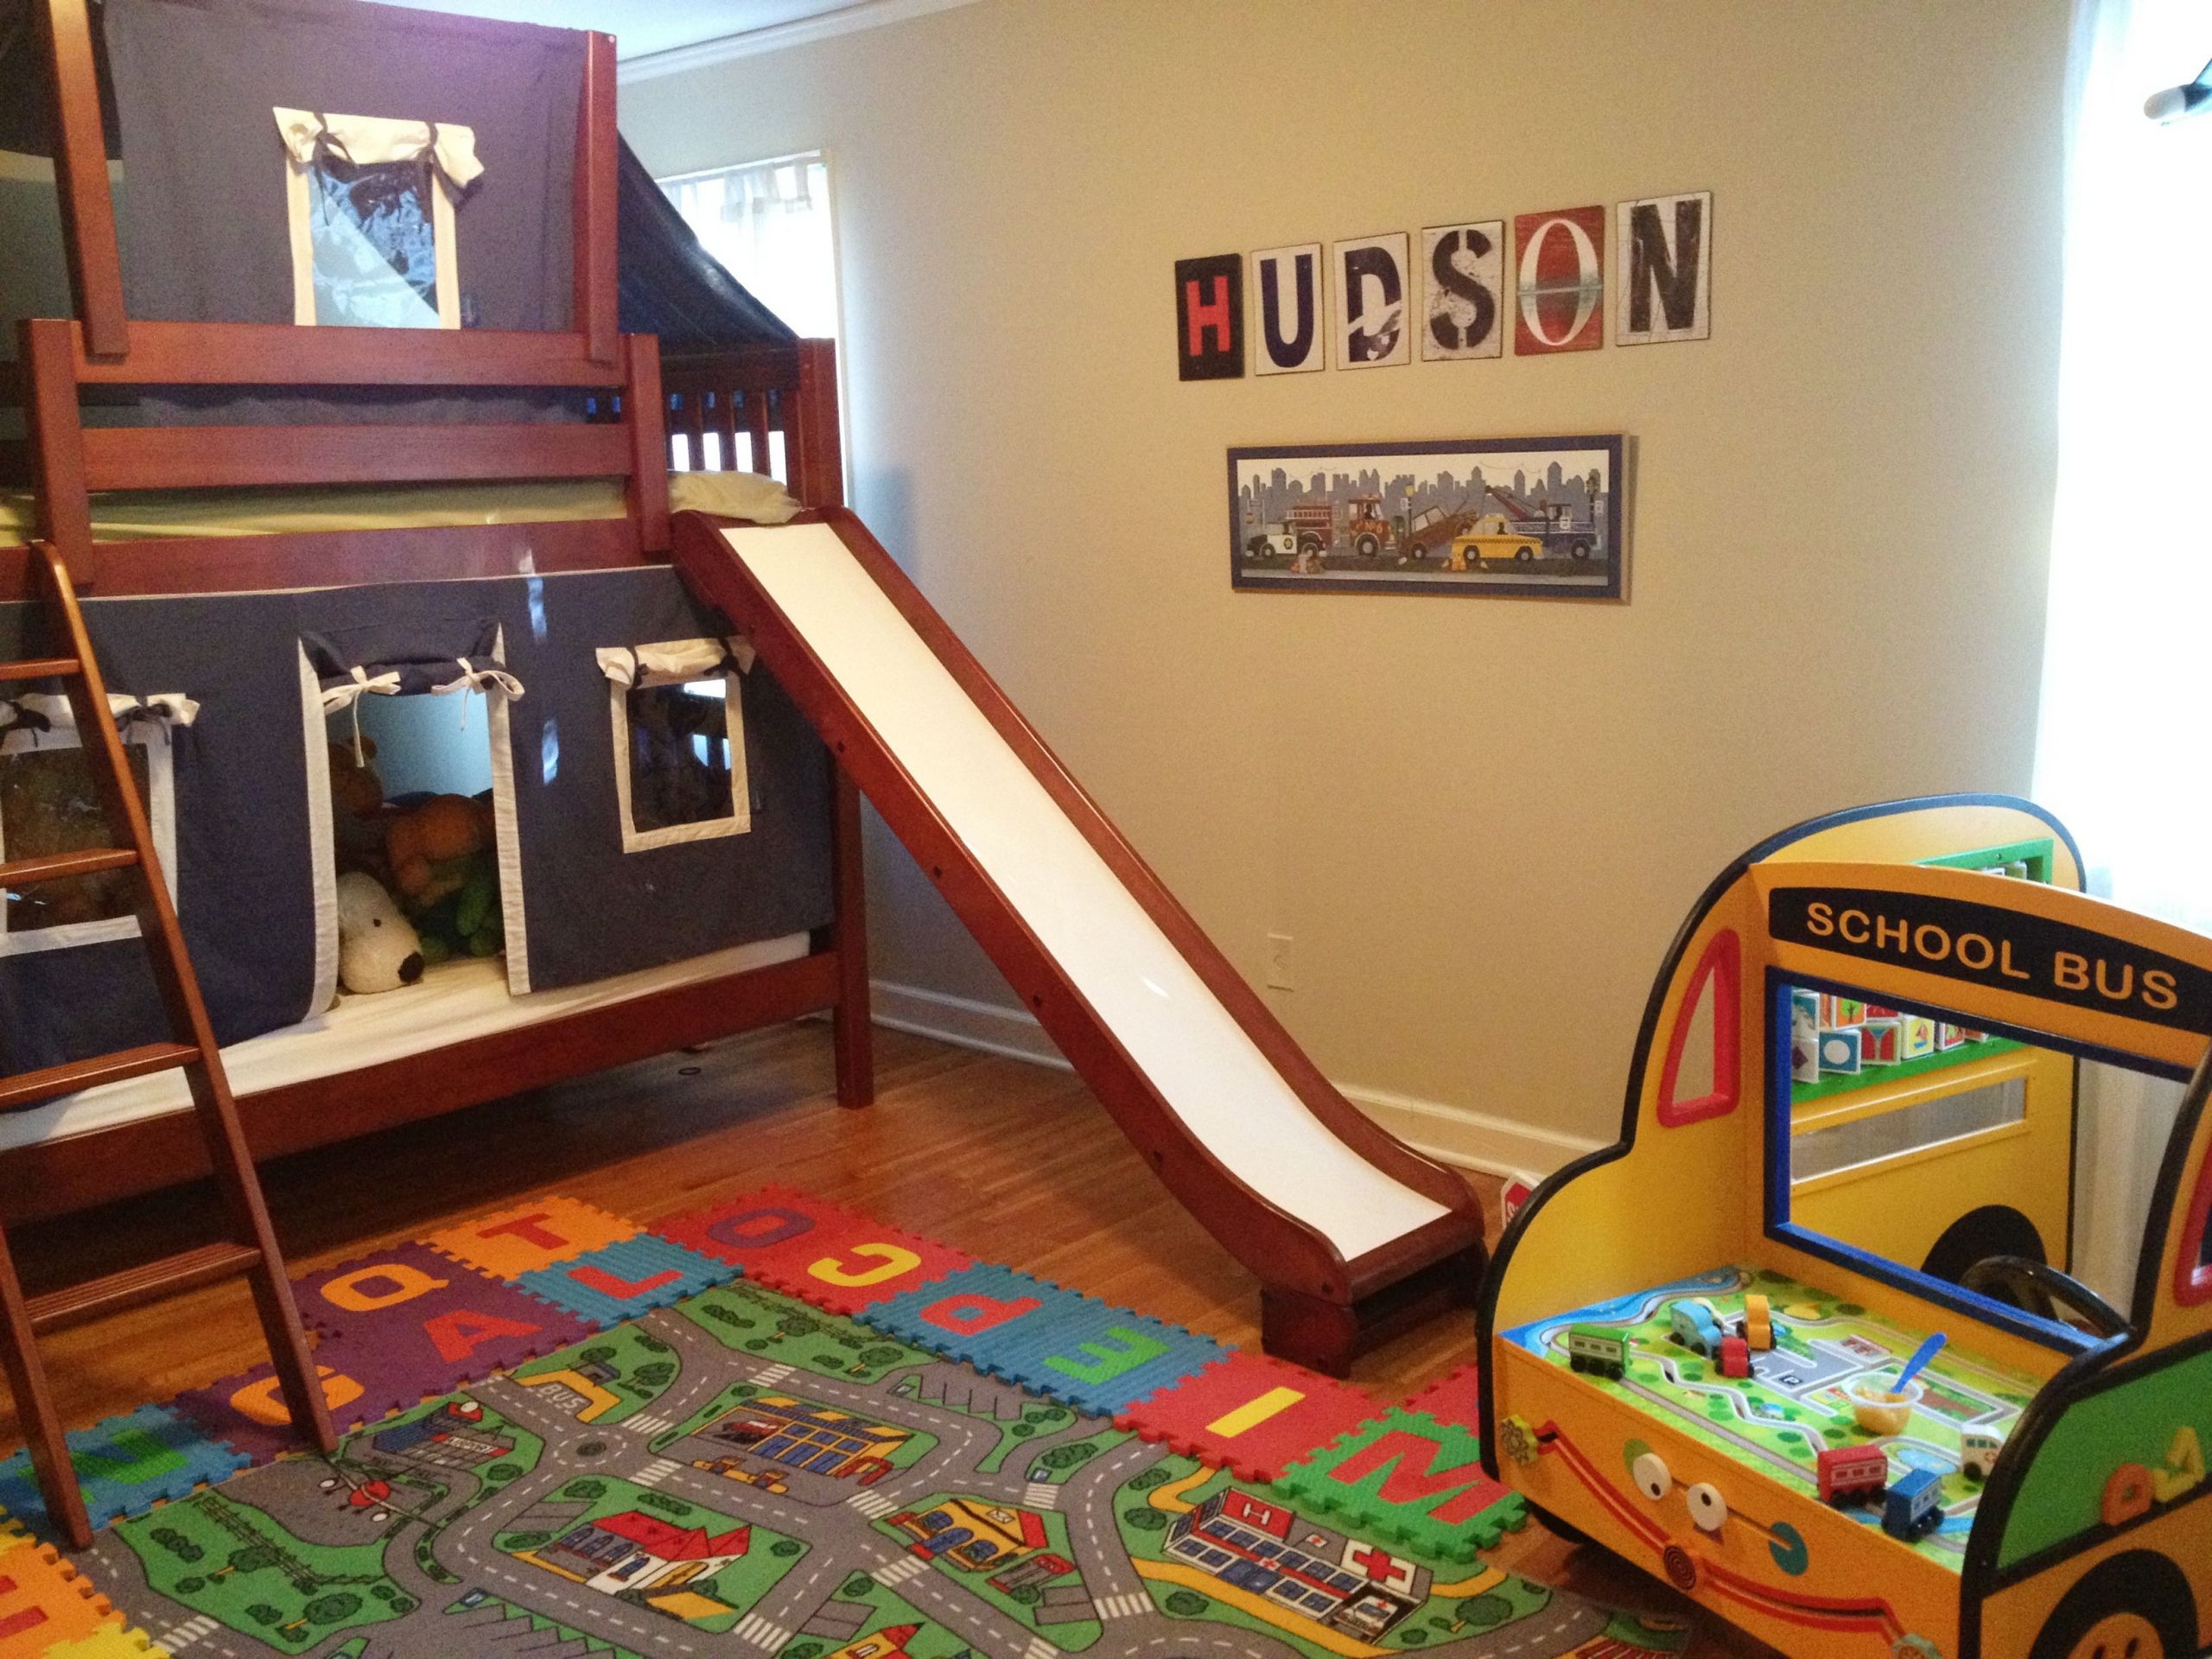 Toddler Boy Bedroom Themes
 The 25 best Toddler boy bedrooms ideas on Pinterest